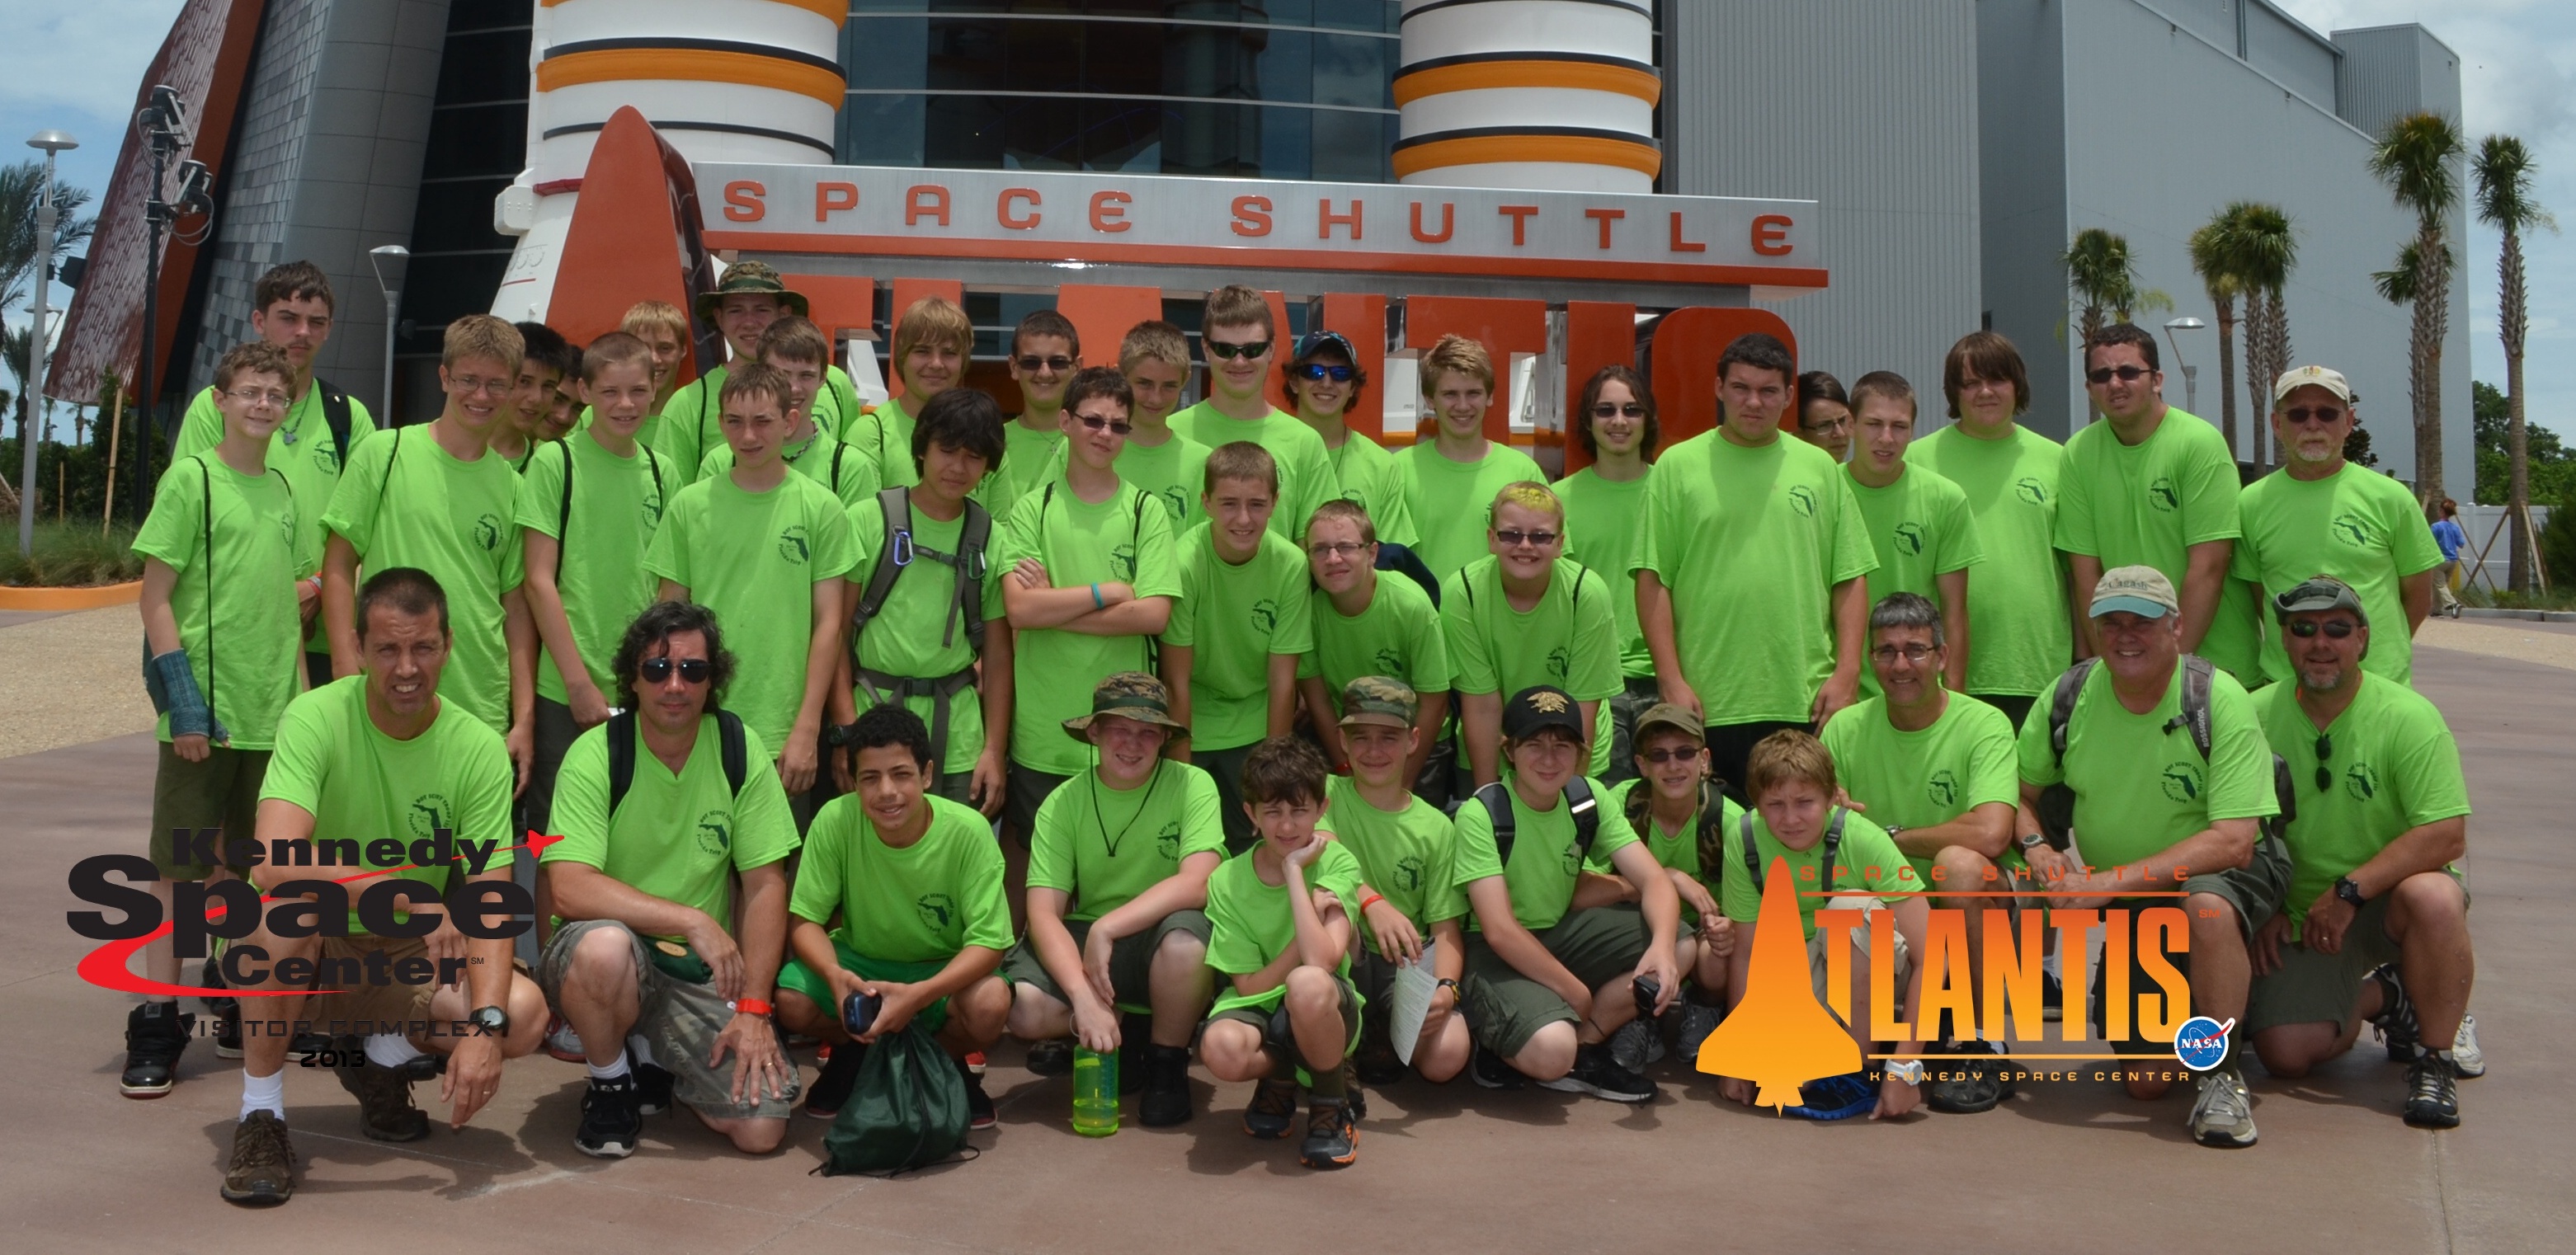 At Kennedy Space Center July 21, 2013